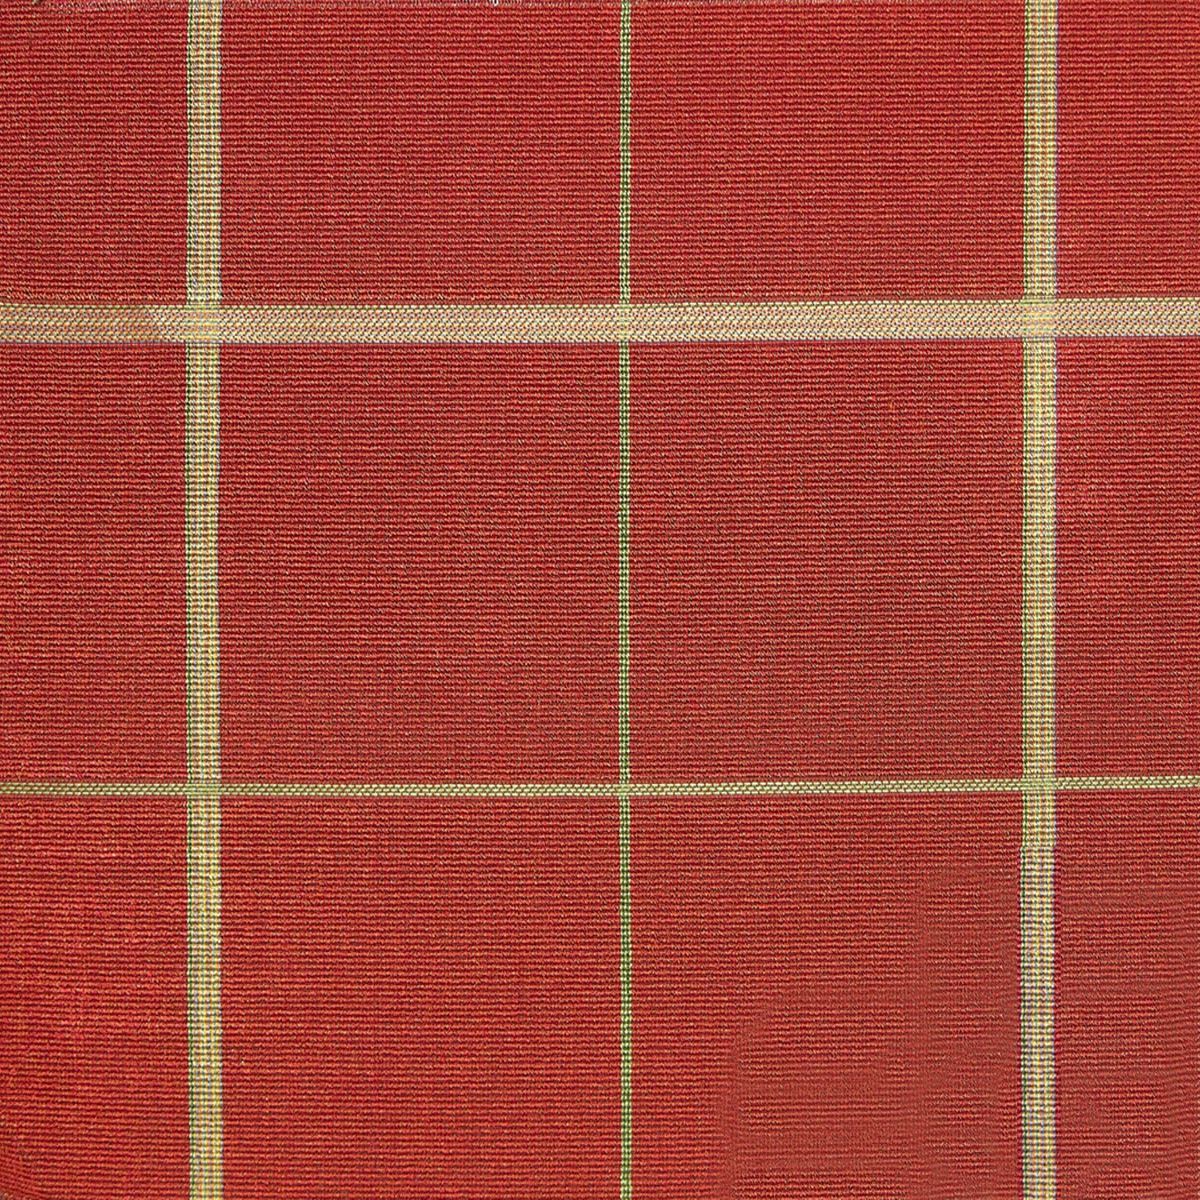 Carriere fabric in rust color - pattern number RH 00103195 - by Scalamandre in the Old World Weavers collection